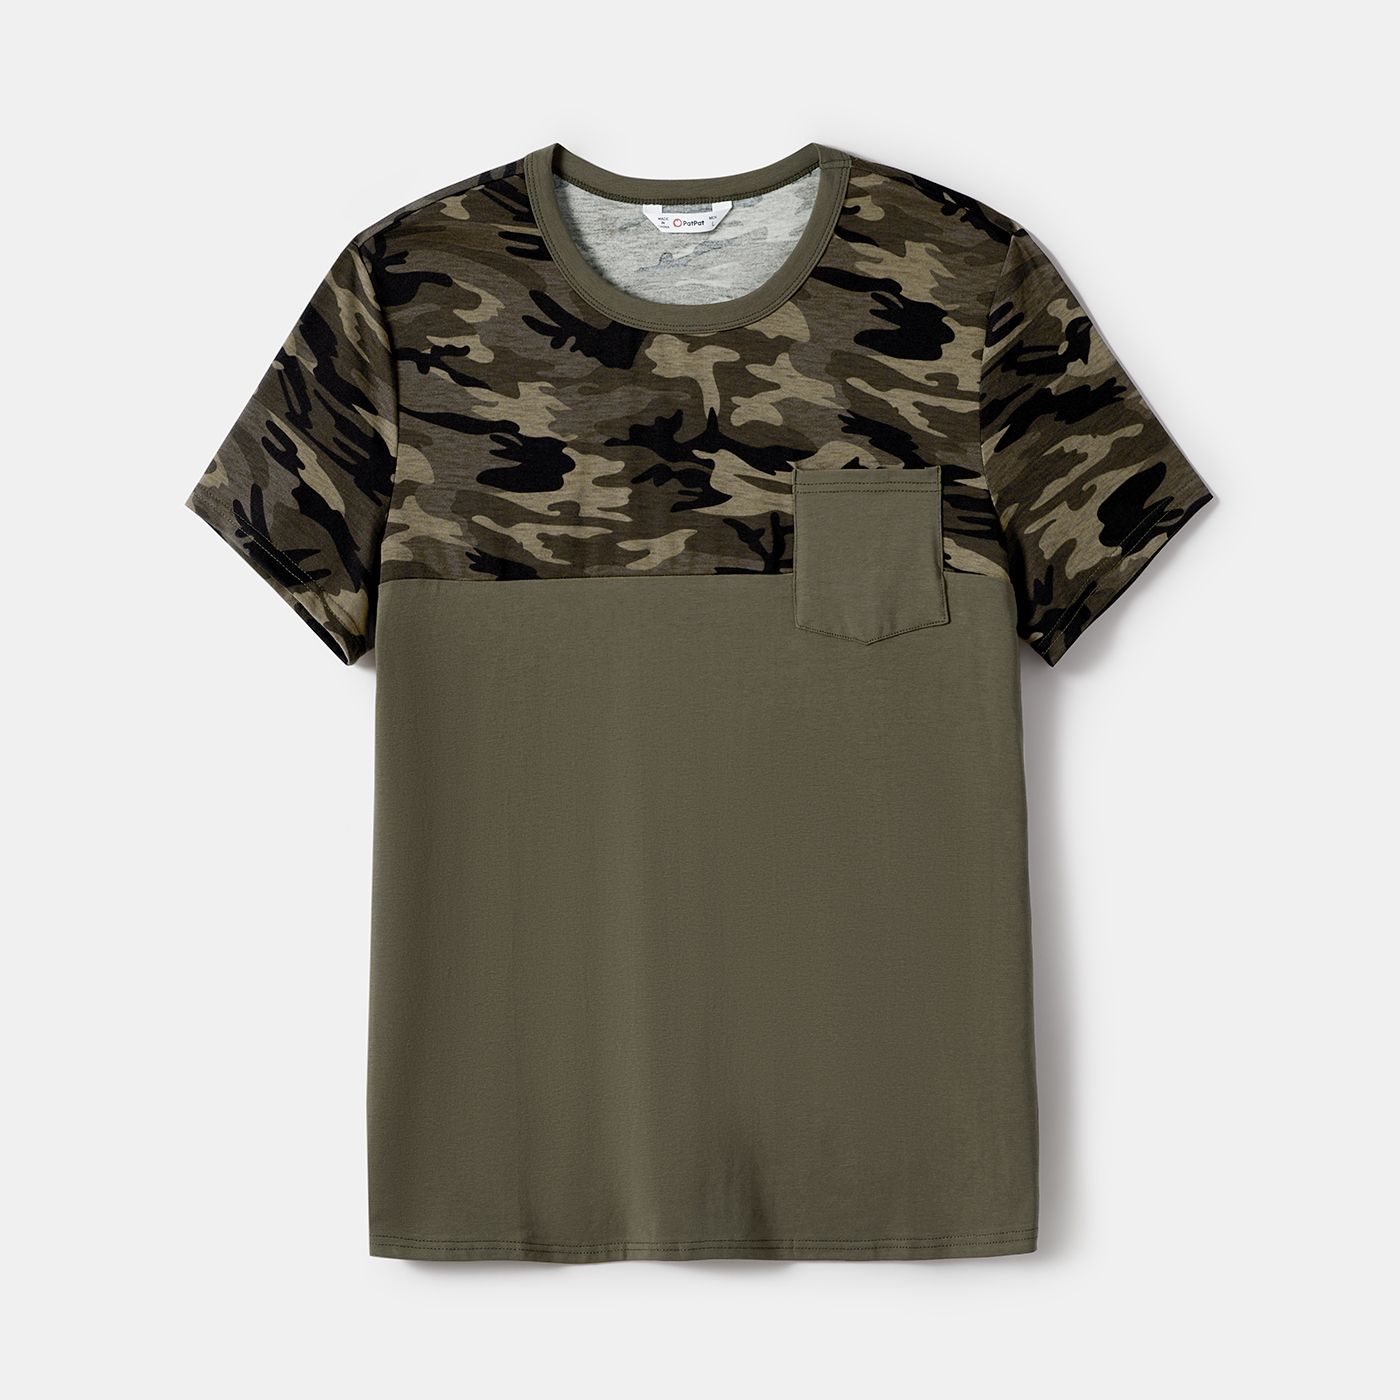 Family Matching Camouflage Tunic Dresses And Patch Pocket T-shirts Sets